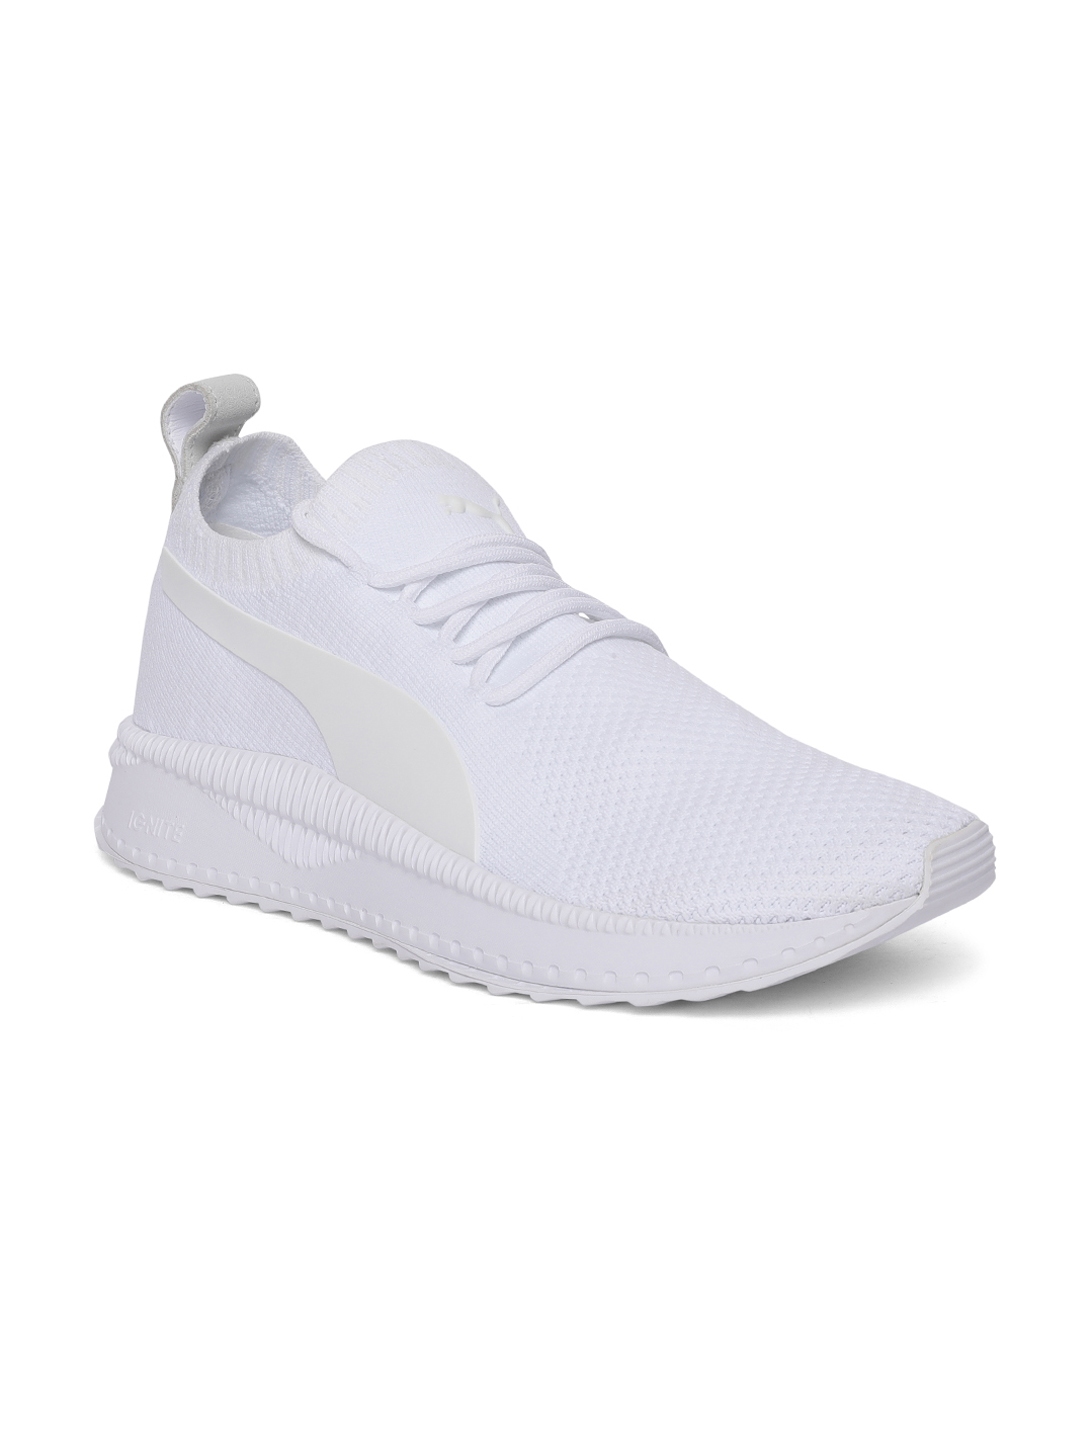 Buy Puma Unisex White Sneakers Casual Shoes For Unisex 8213243 Myntra 3093